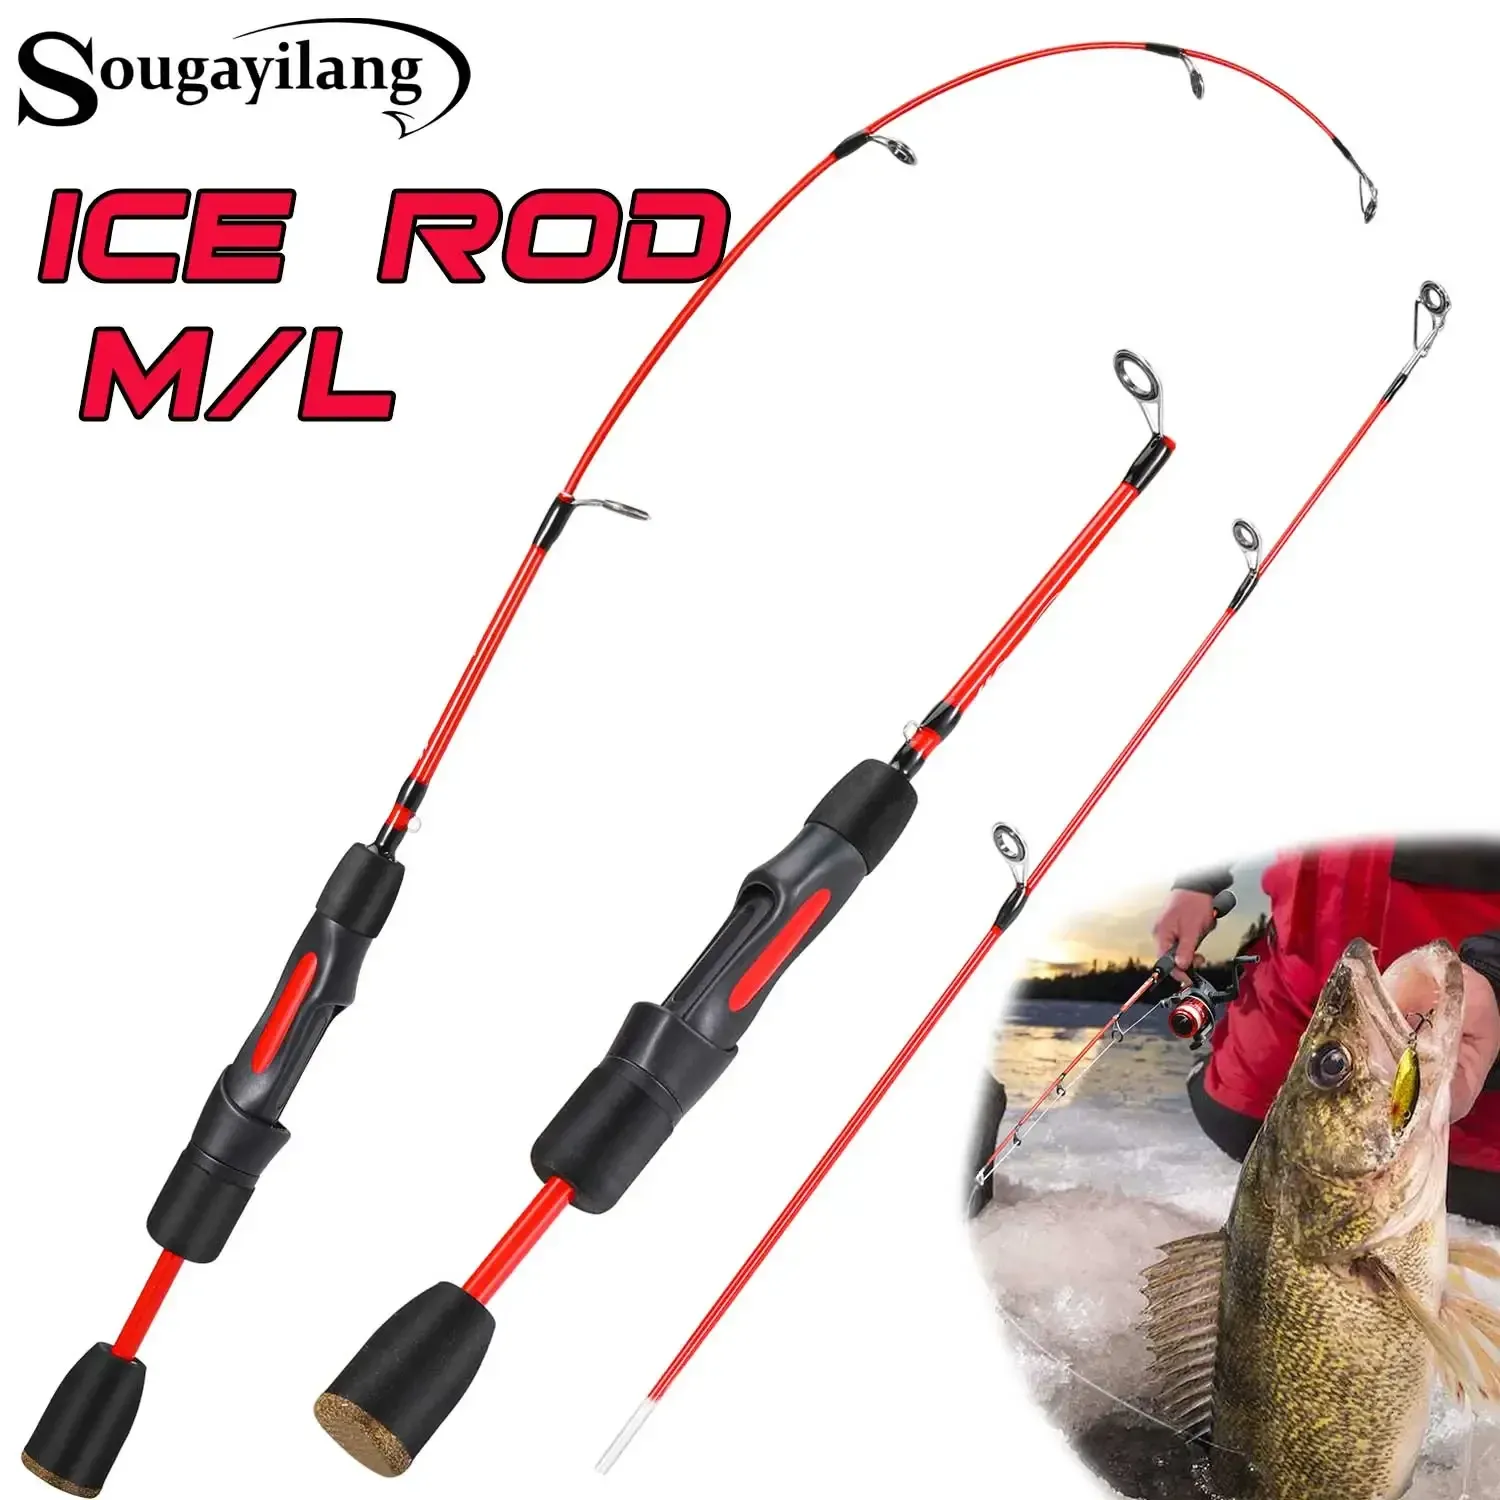 Rods Sougayilang Ice Fishing Rod 2 Sections High Carbon Fiber Ice Rods with M/L Power Two Rod Tips Max Drag 8Kg Fishing on The Ice